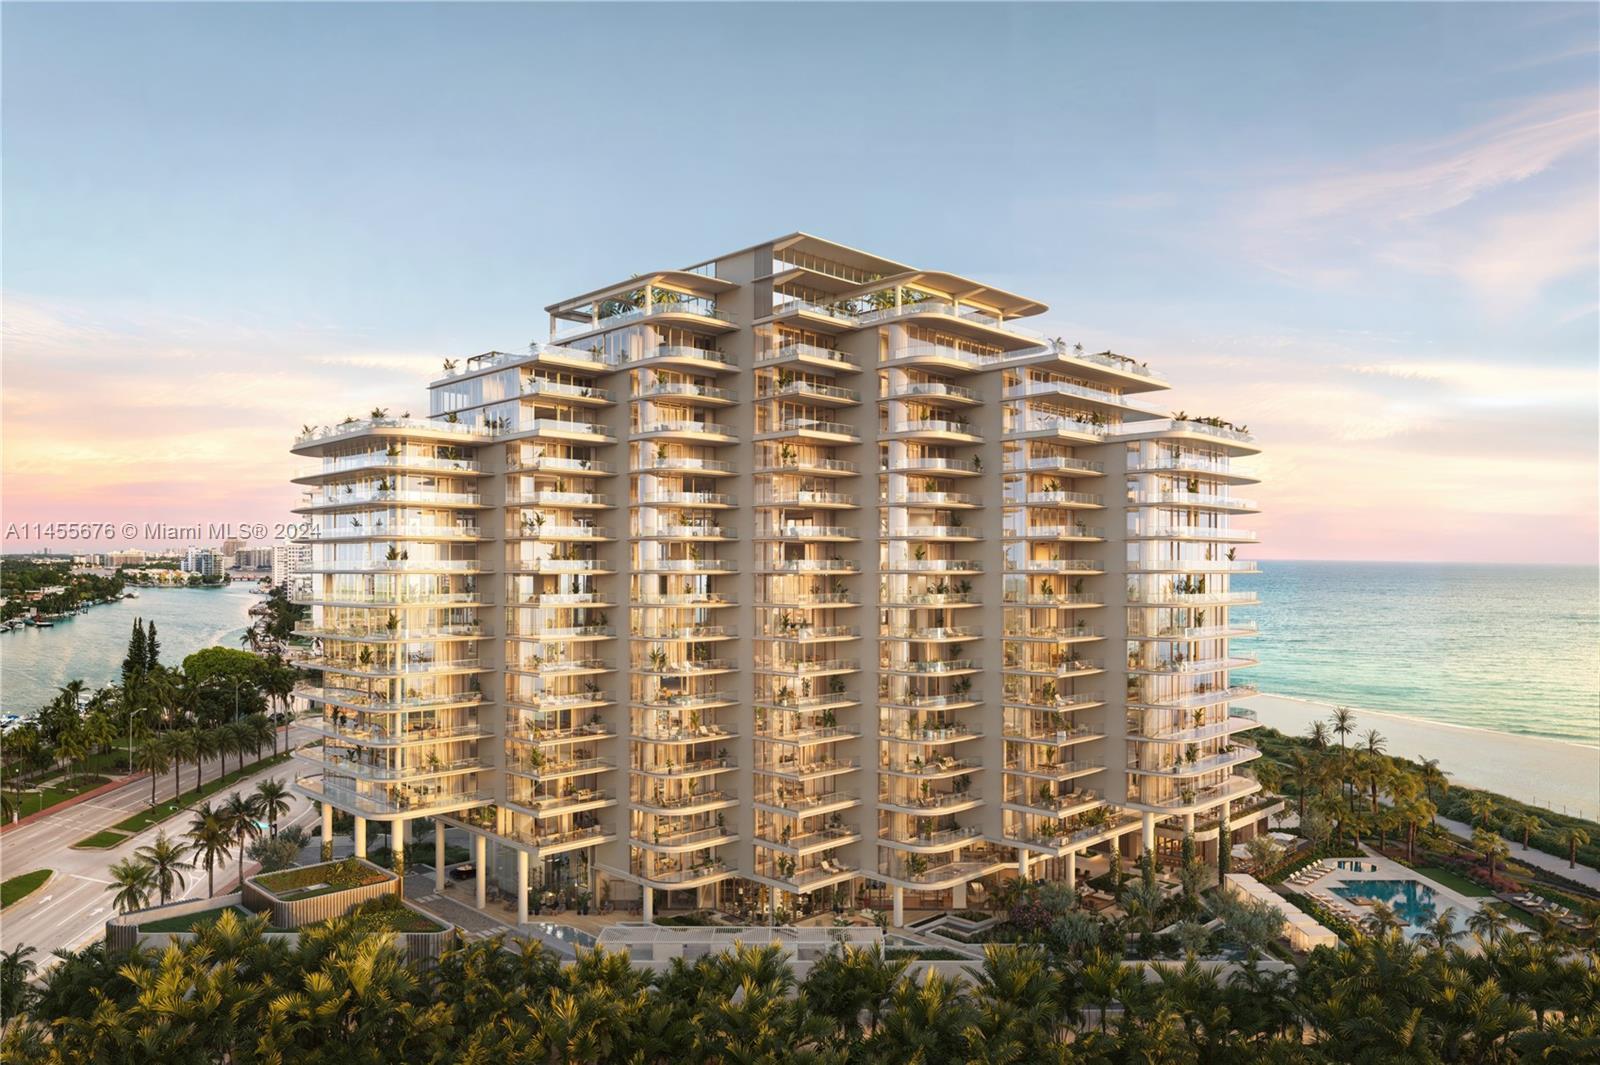 The Perigon Miami Beach - the newest ON THE SAND property to be developed in Miami Beach at 5333 Col